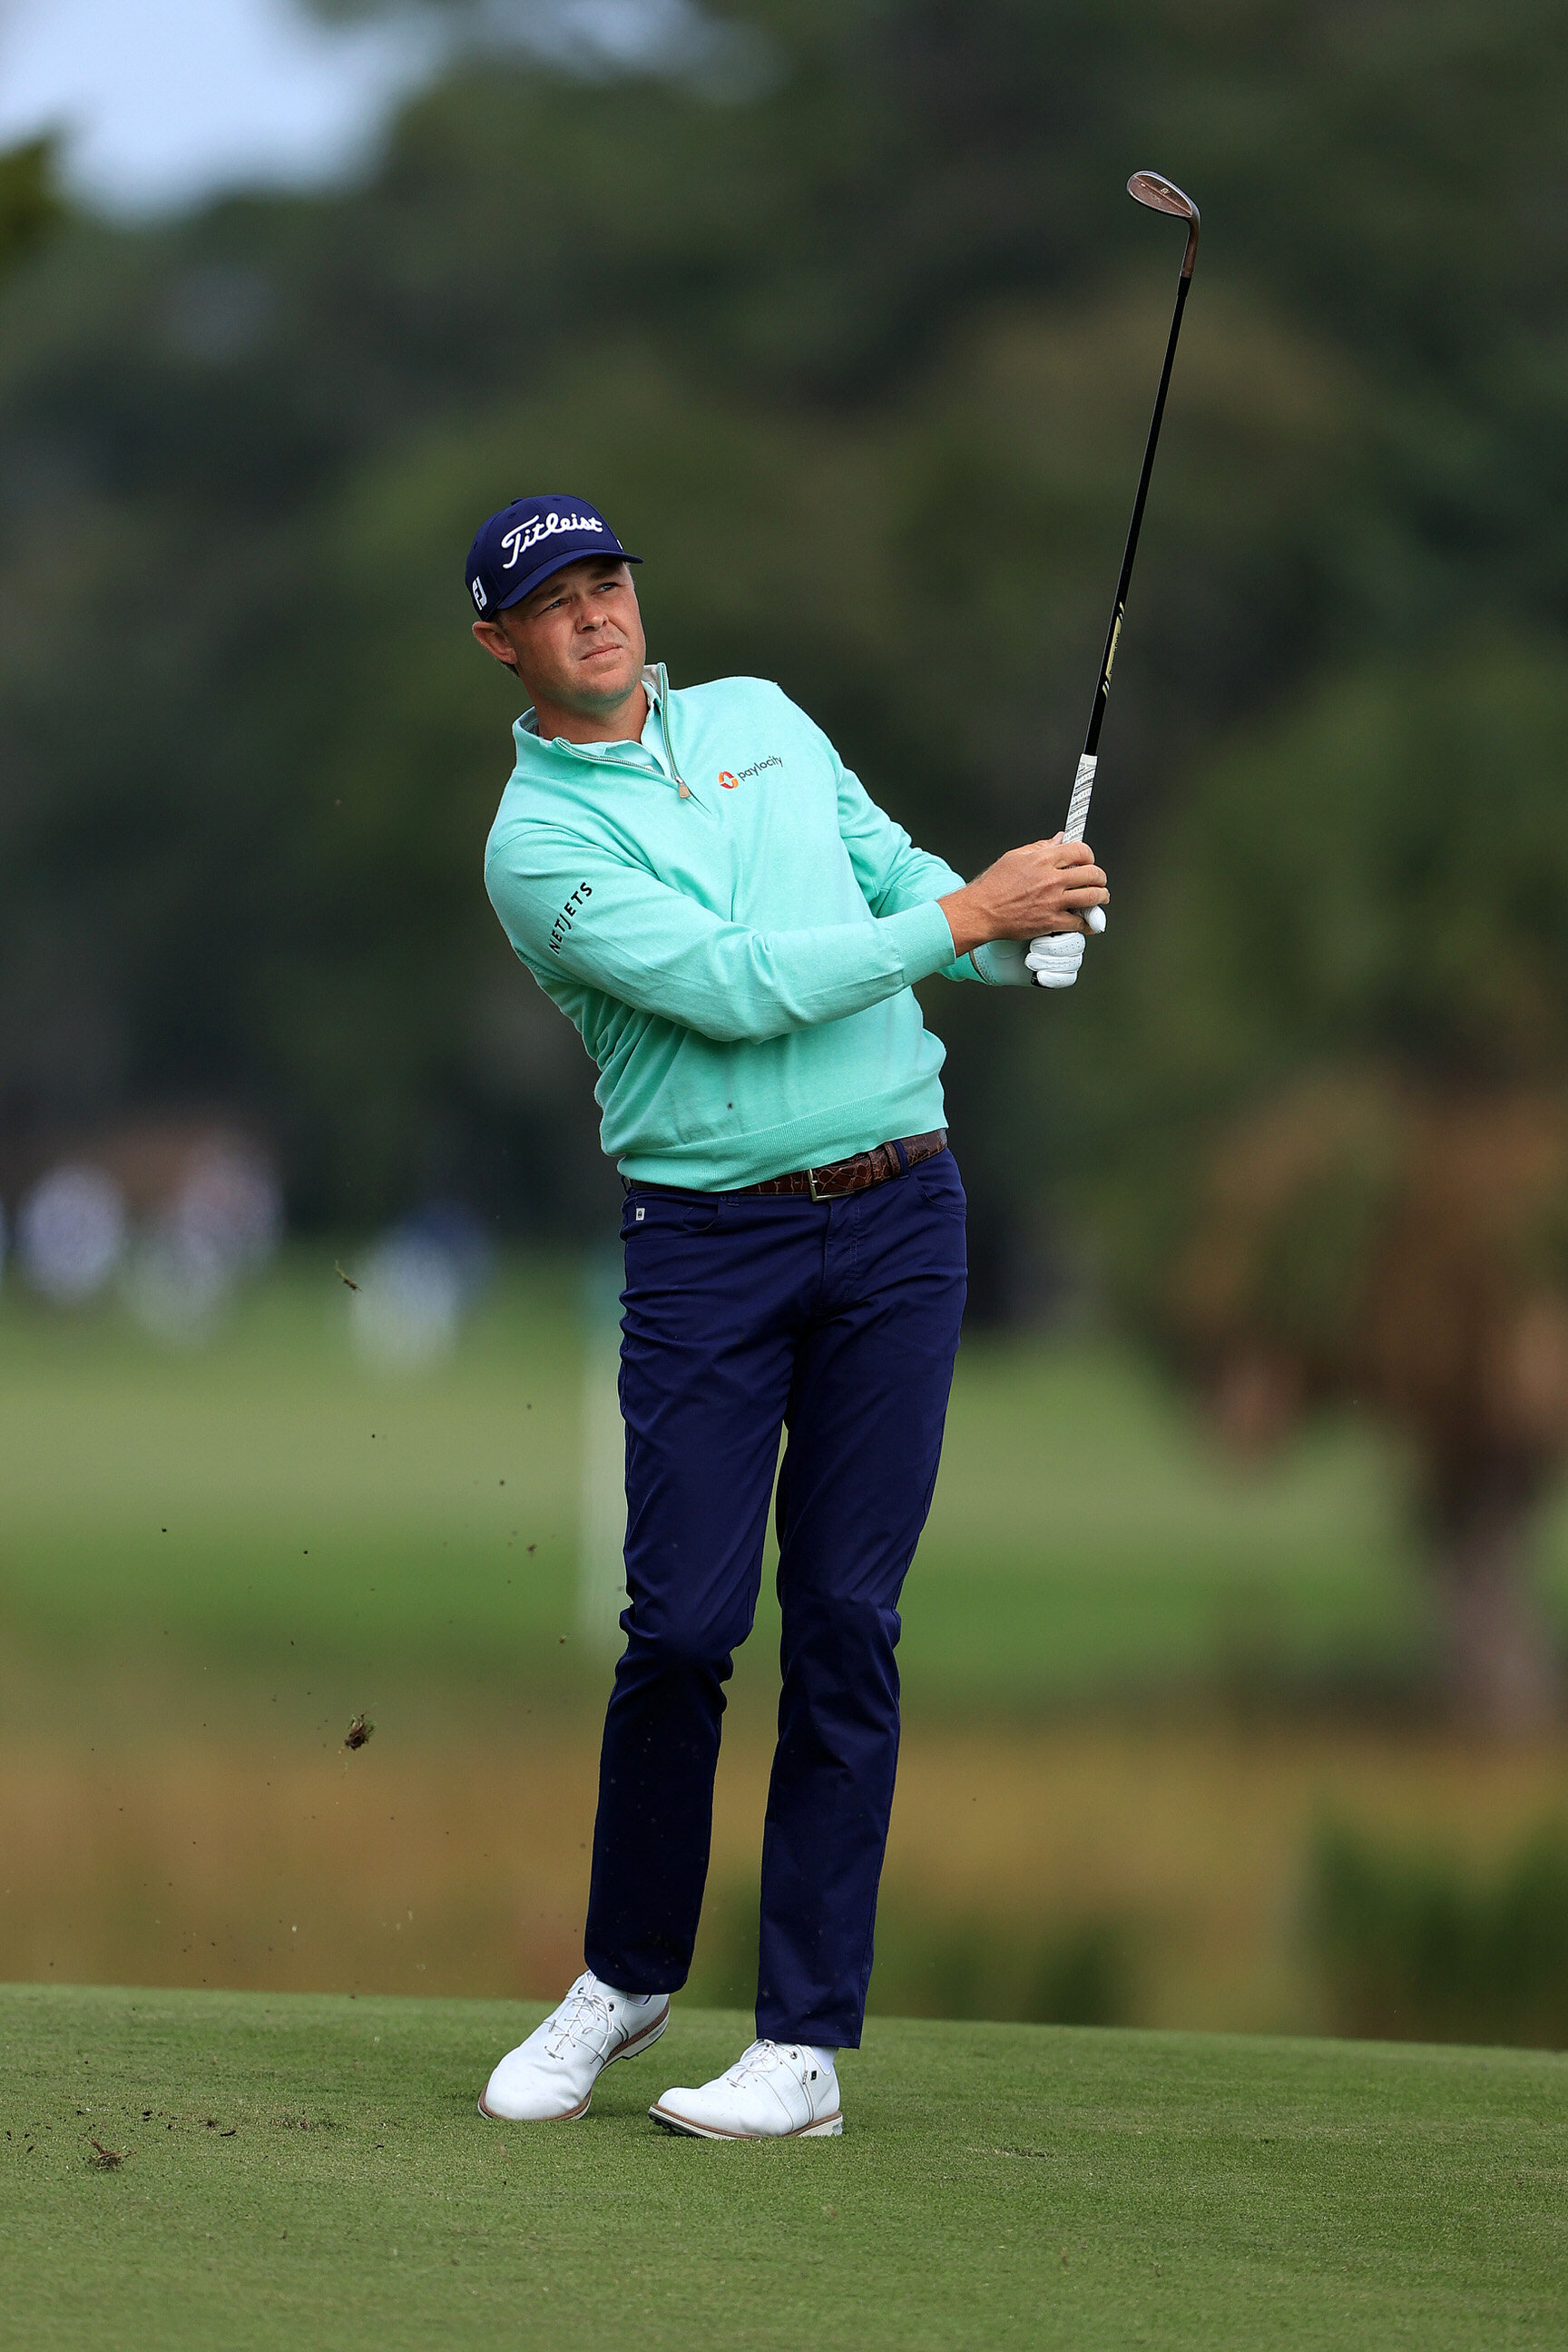  ST SIMONS ISLAND, GEORGIA - NOVEMBER 19:  Patton Kizzire of the United States plays his second shot on the eighth hole during the first round of The RSM Classic at the Seaside Course at Sea Island Golf Club on November 19, 2020 in St Simons Island, 